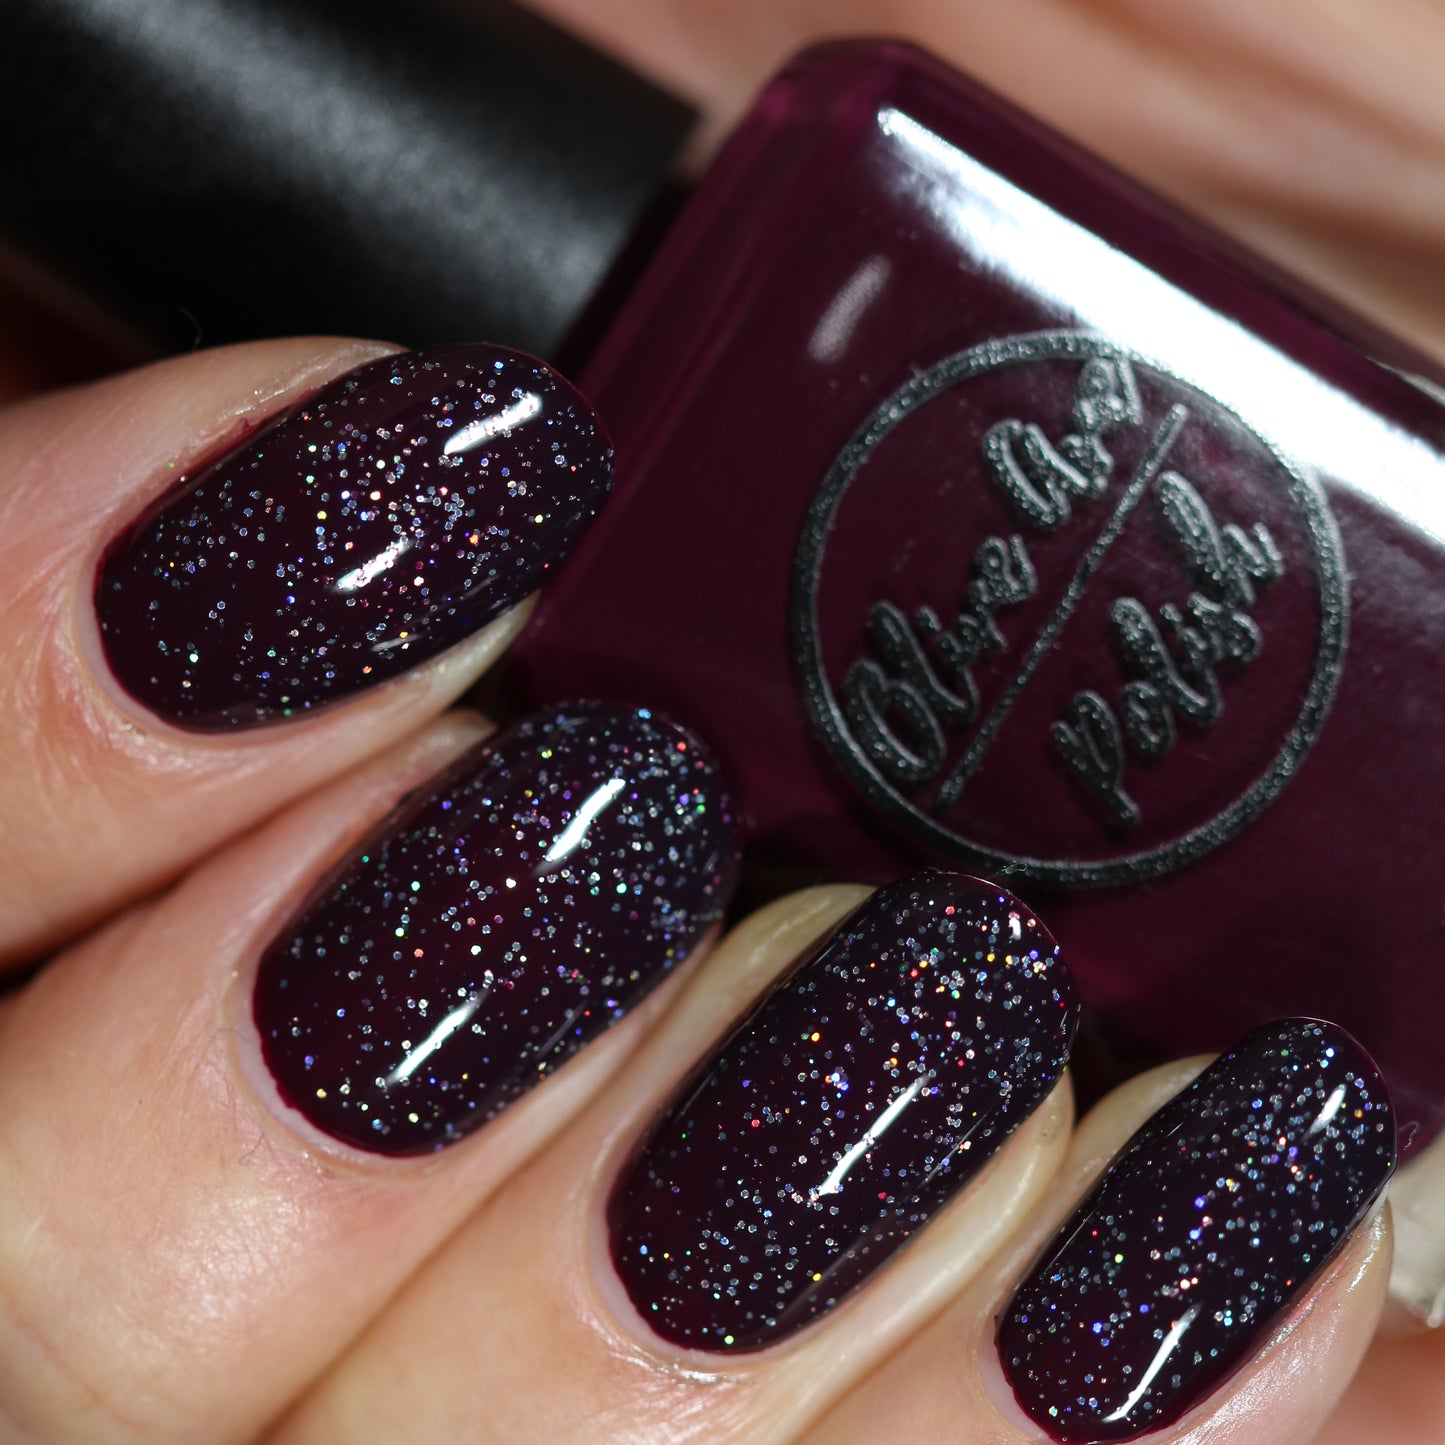 Black holographic nail polish layered over red polish swatch on pale skin tone